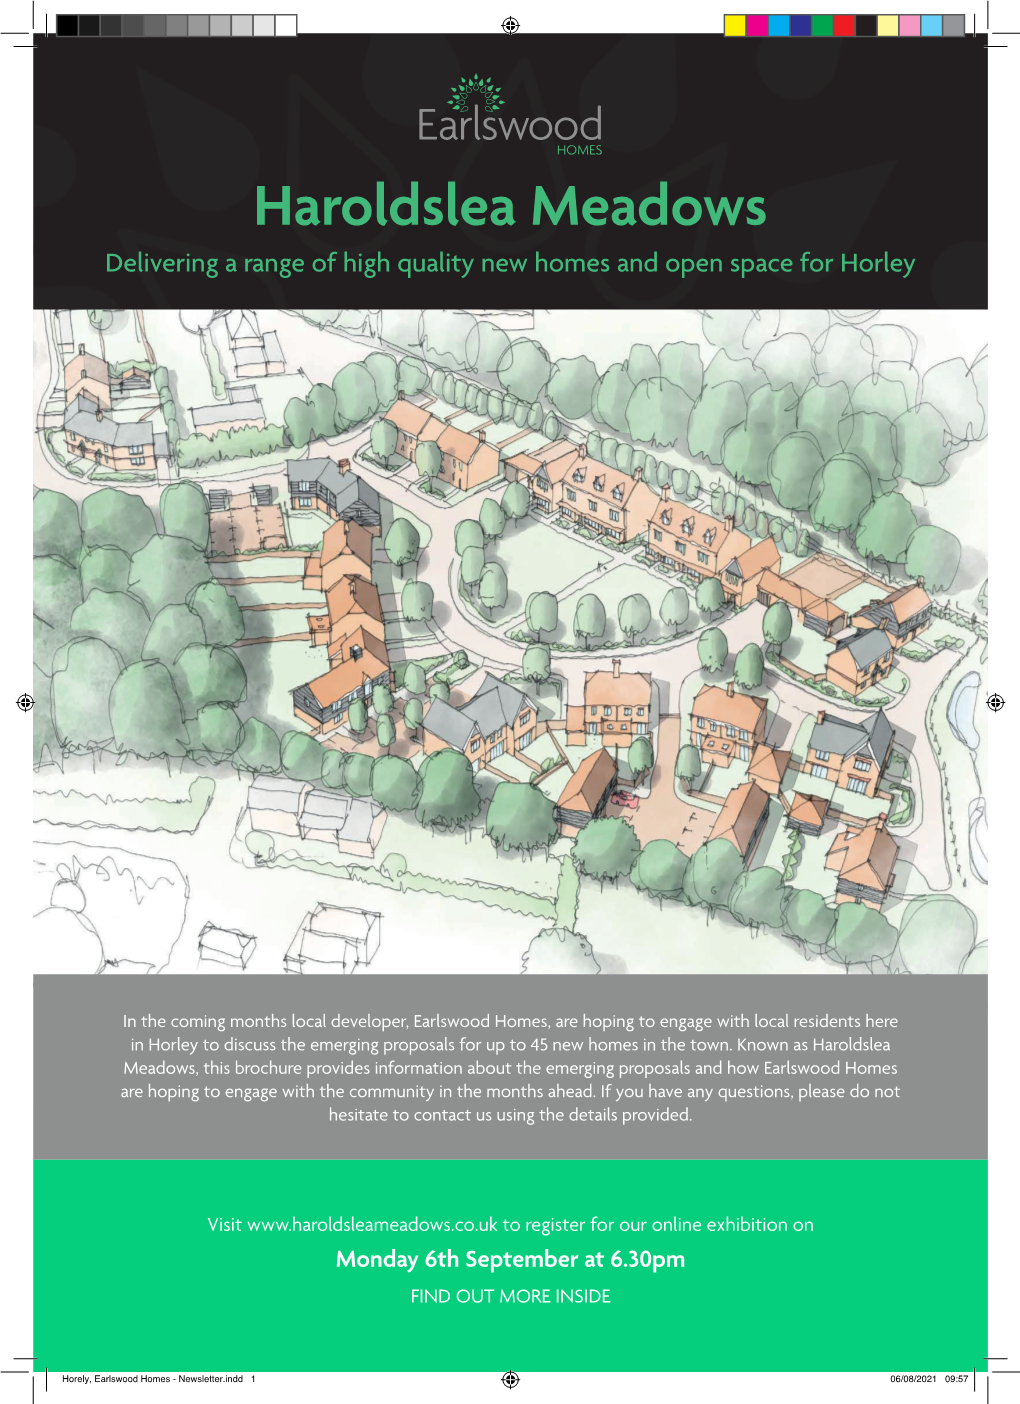 Haroldslea Meadows Delivering a Range of High Quality New Homes and Open Space for Horley